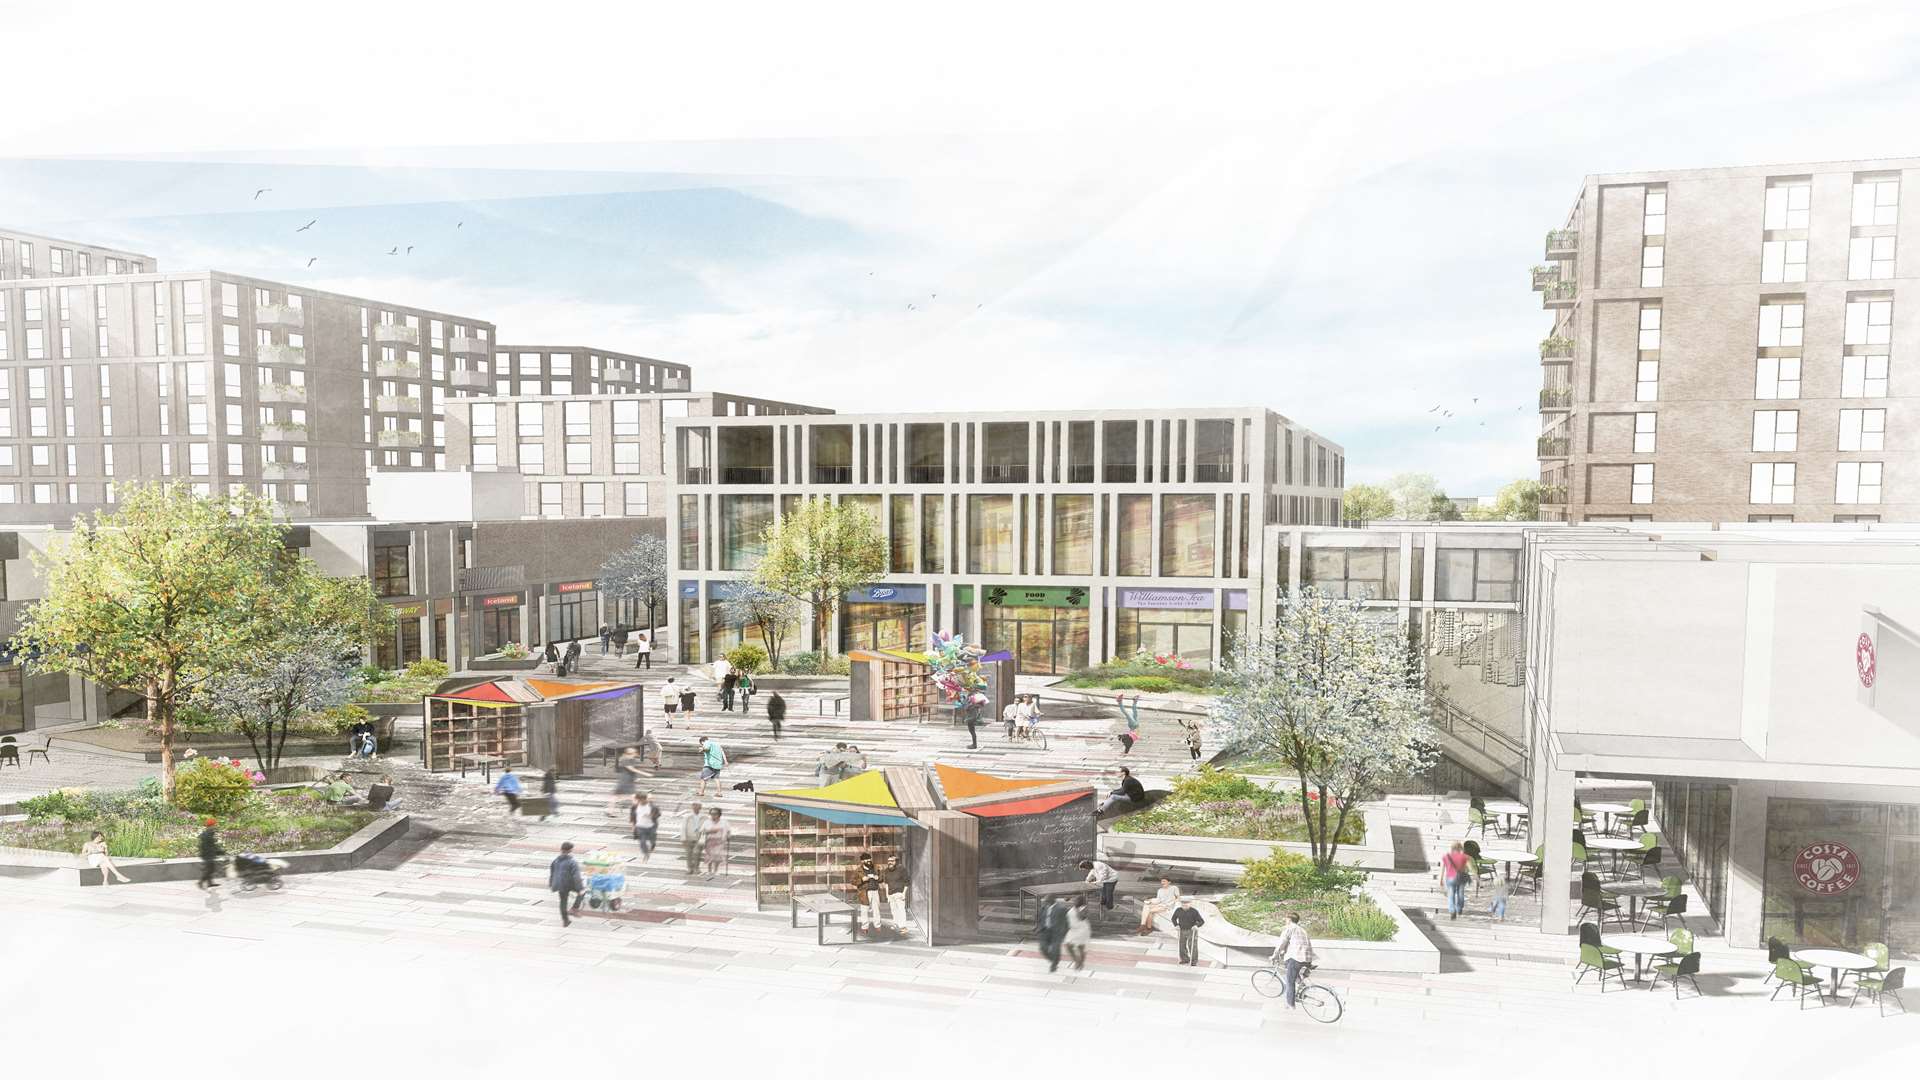 The transformation aims to complement the existing shopping centre.